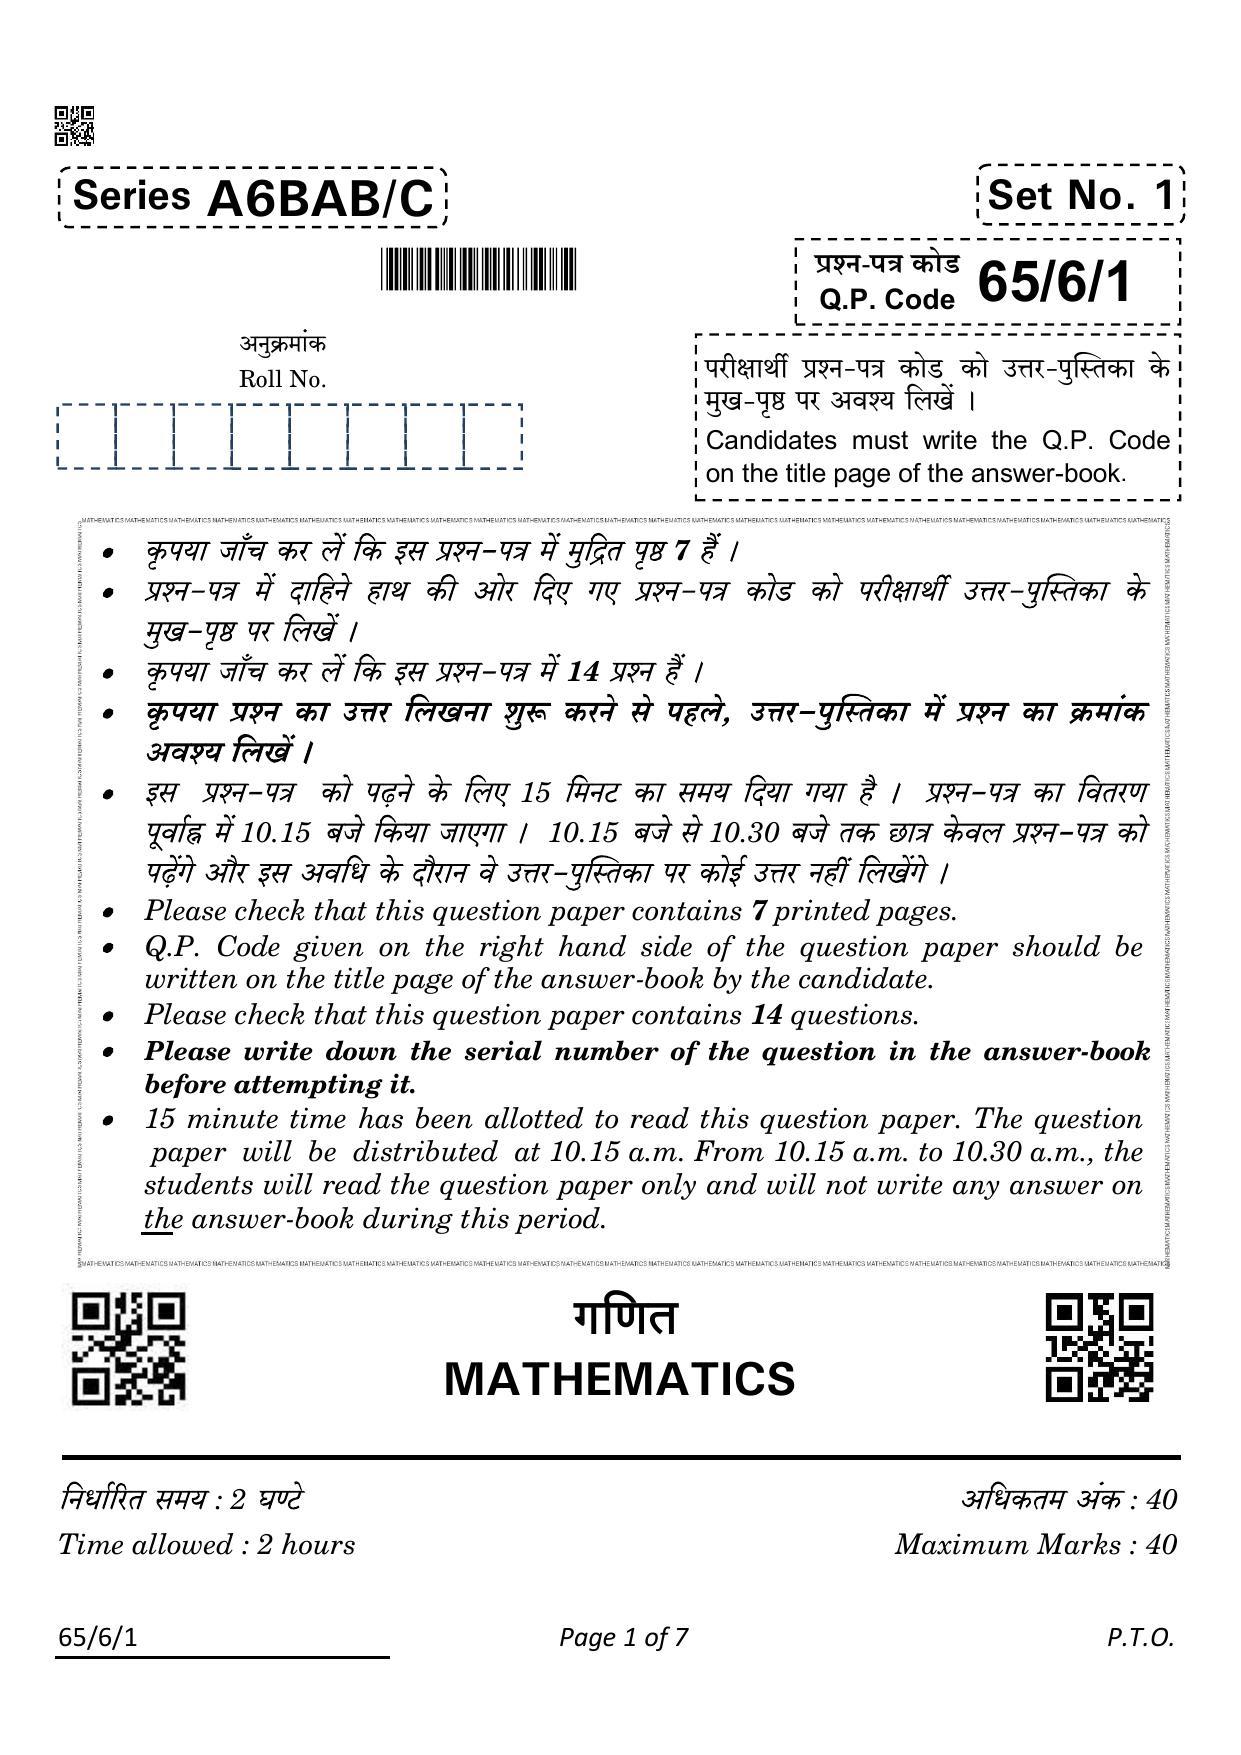 CBSE Class 12 65-6-1 MATHS 2022 Compartment Question Paper - Page 1